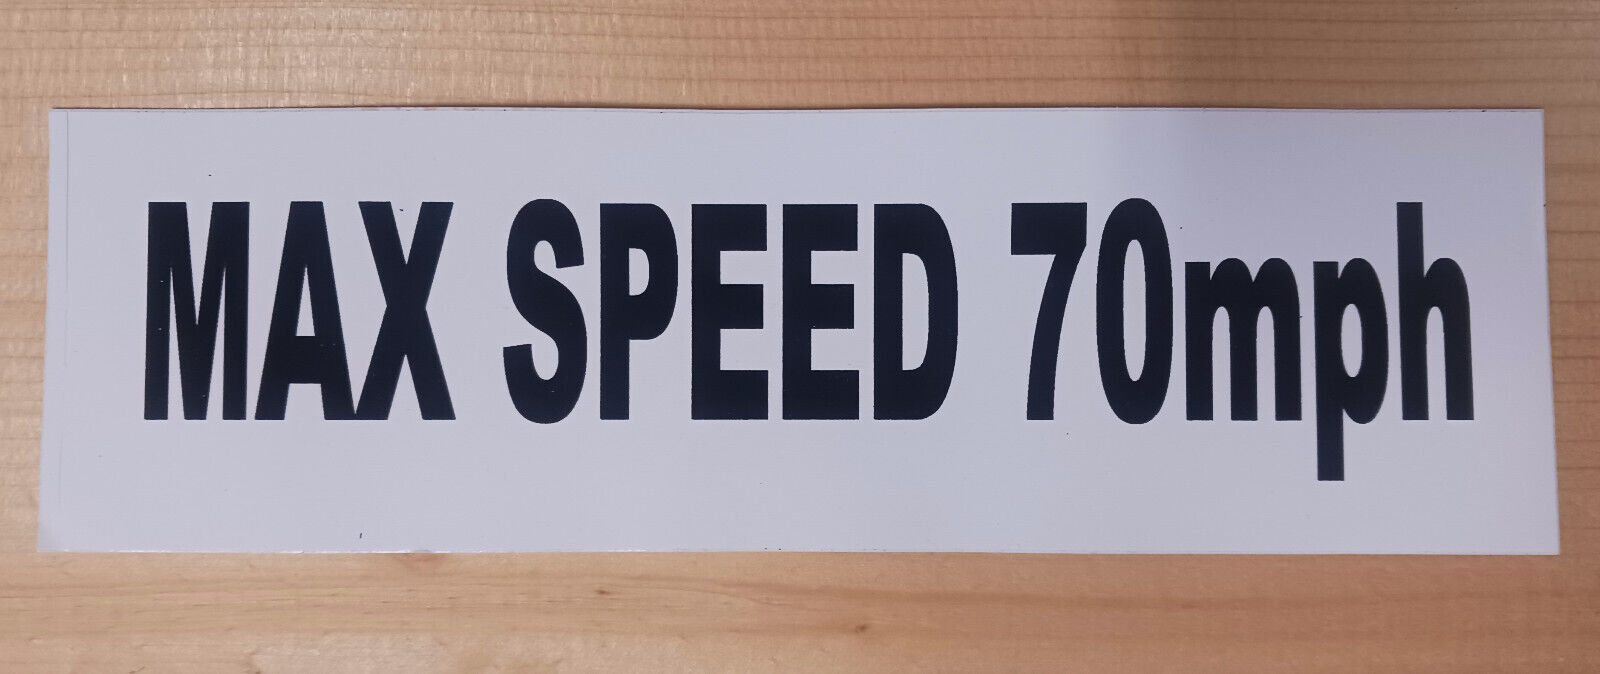 Max Speed 70 MPH for Work Vehicles restricted by regulator 10 x 3 Bumper Sticker